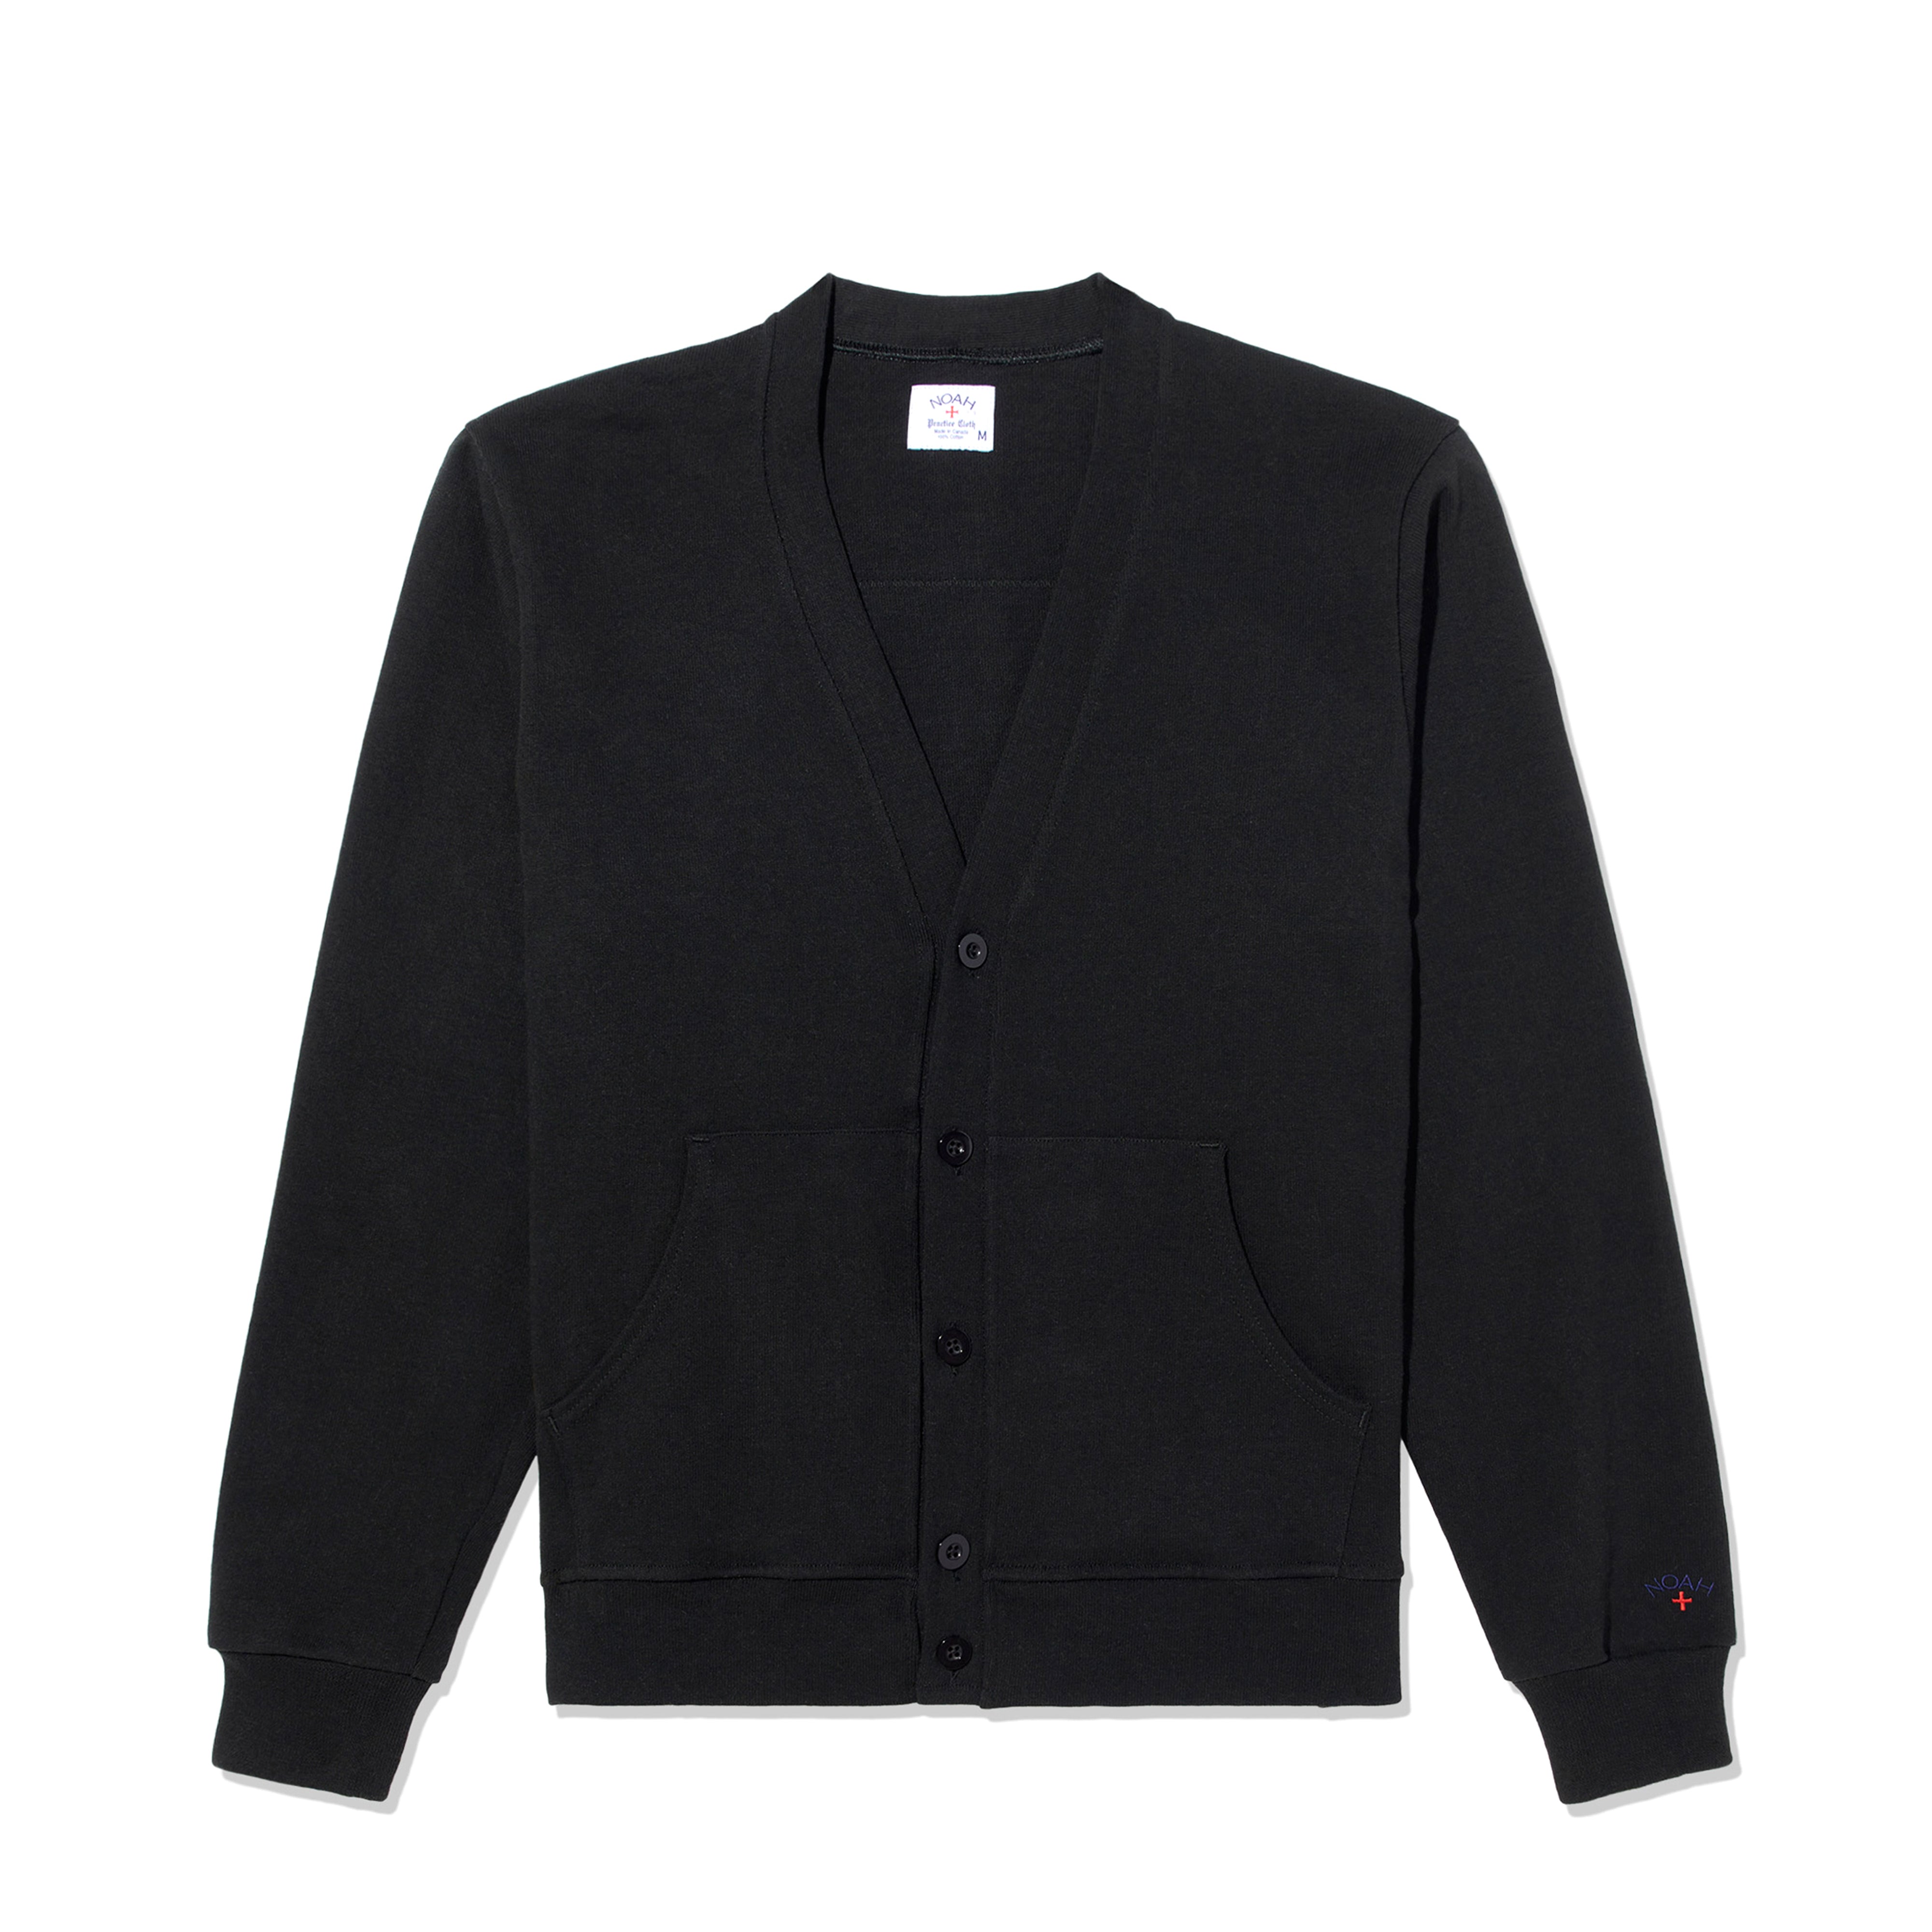 Noah - The Cure Men's Rugby Cardigan - (Black)